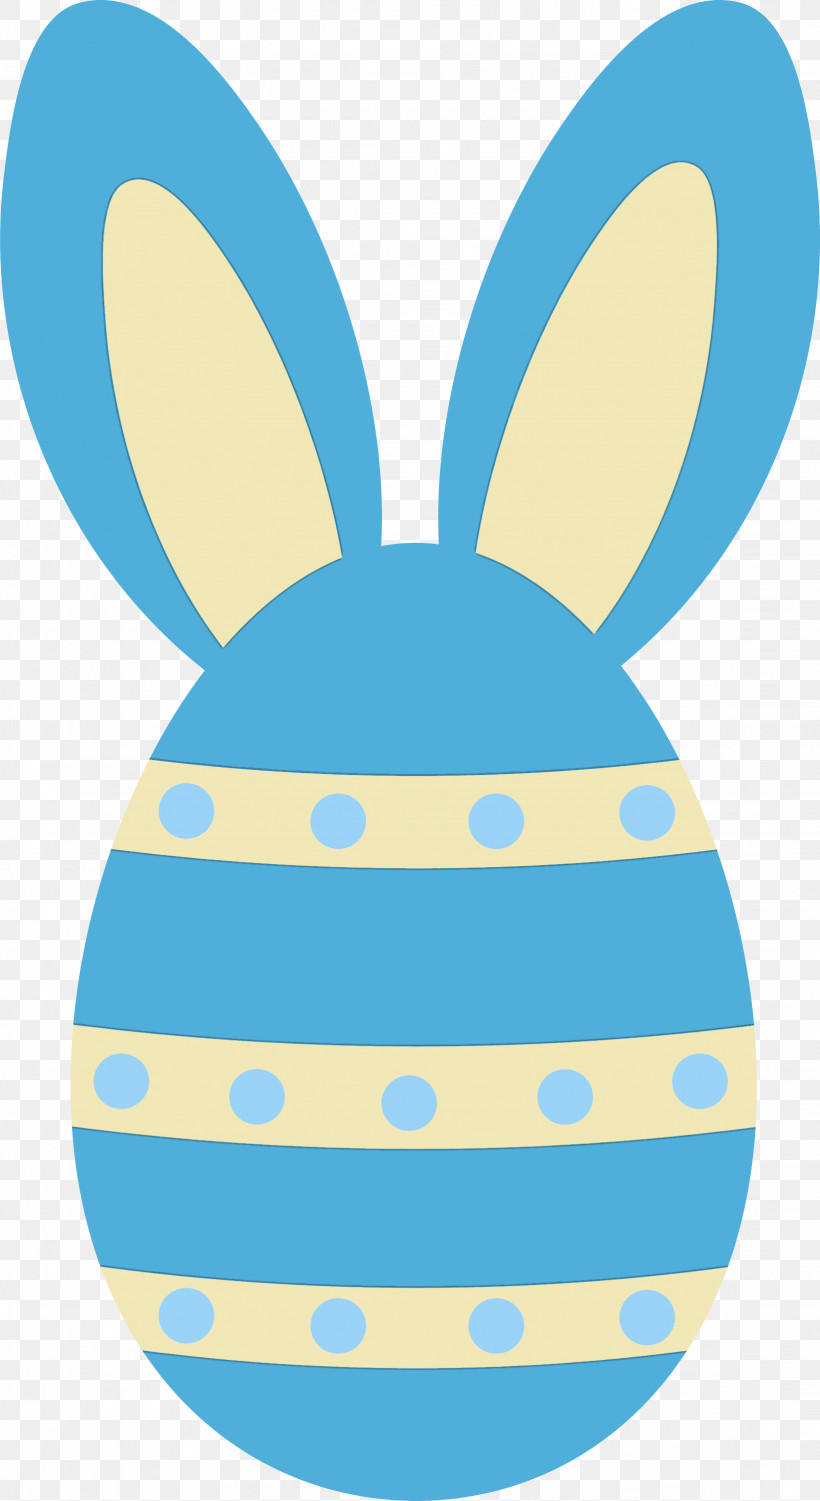 Easter Egg With Bunny Ears, PNG, 1638x3000px, Easter Egg With Bunny Ears, Aqua, Easter Bunny, Teal, Turquoise Download Free